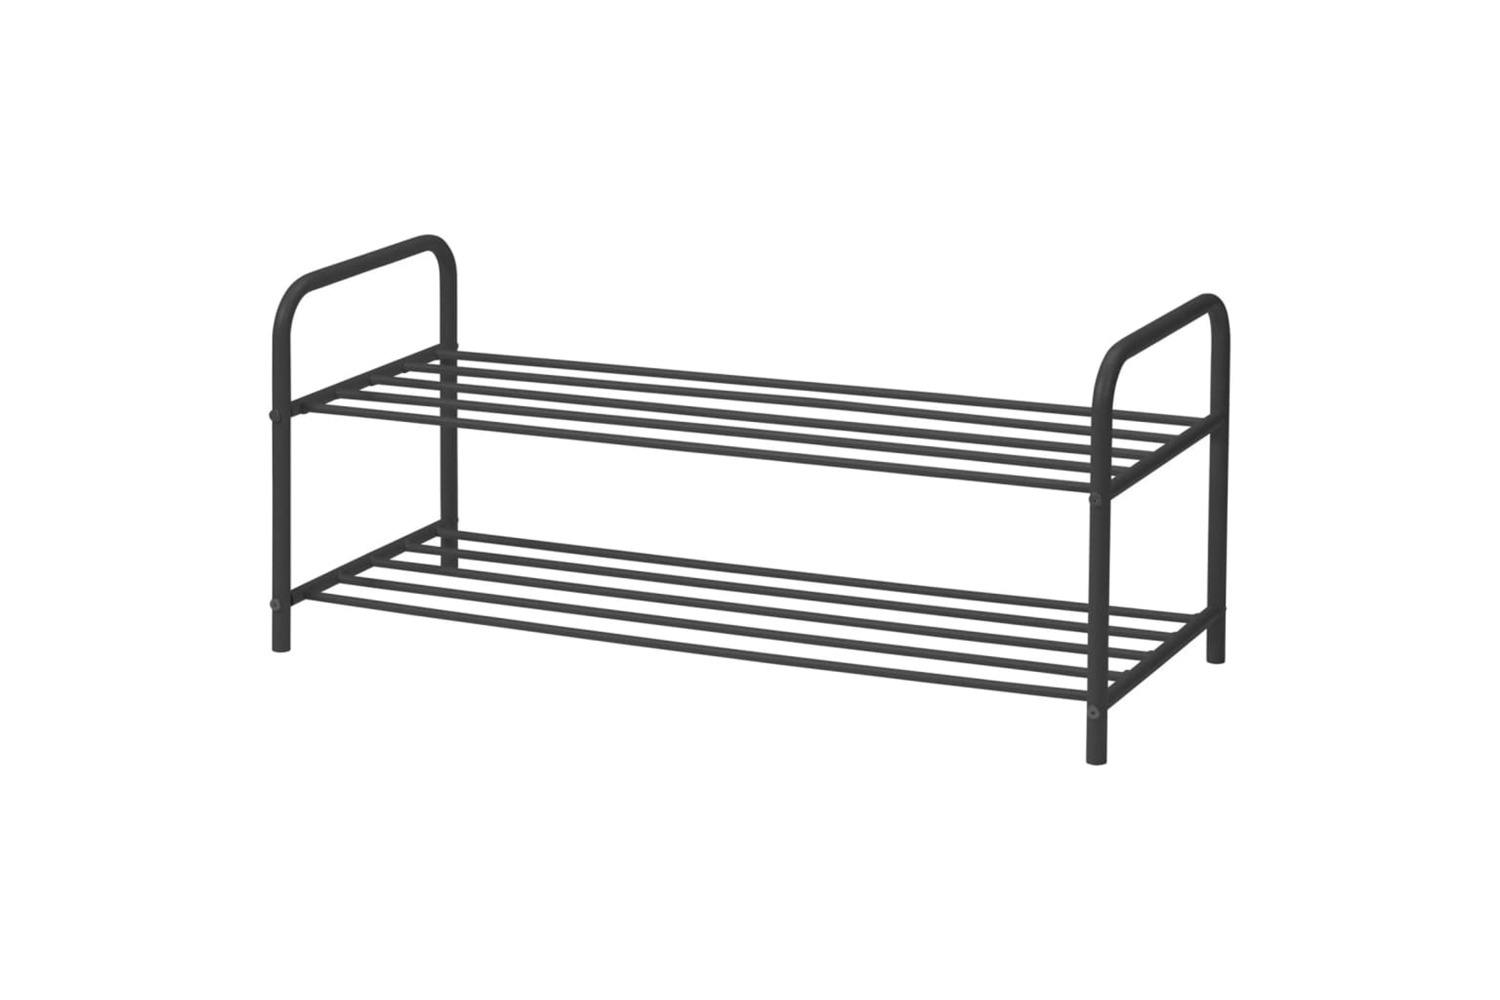 Storage Solutions 442522 Storage Solutions Shoe Rack With 2 Levels 91x35x38.5 Cm